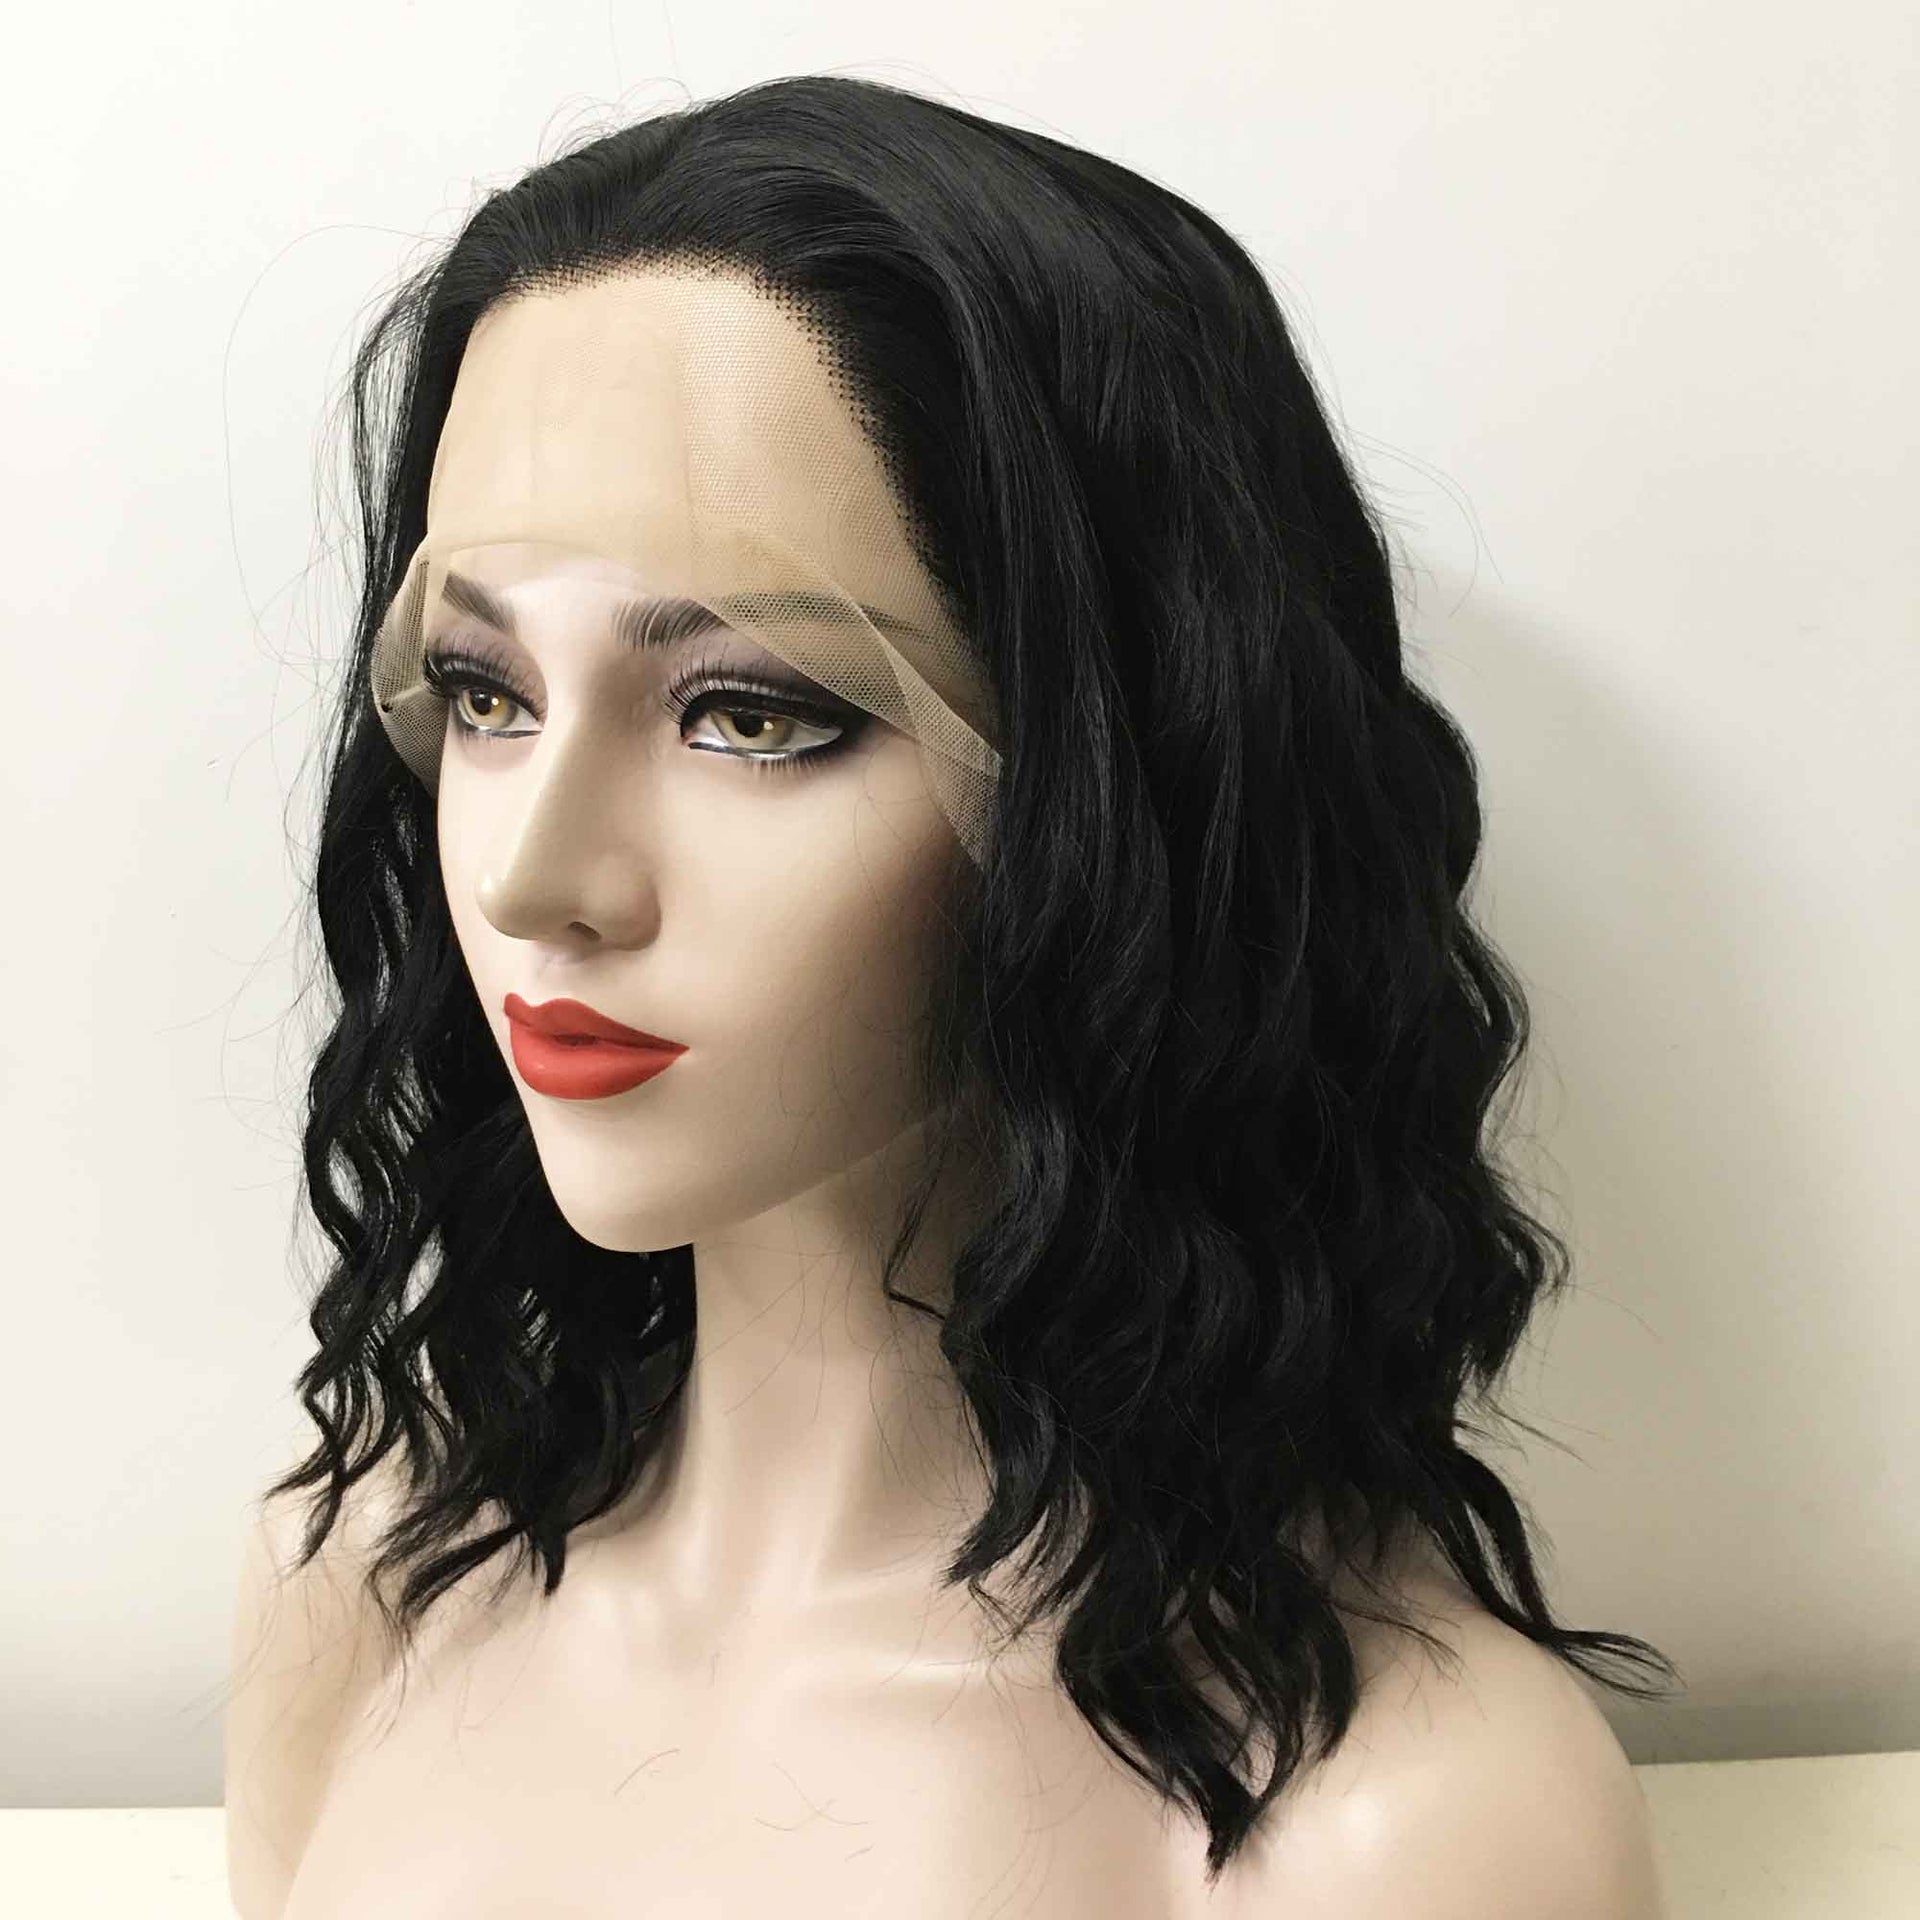 nevermindyrhead Women Auburn Ginger Red or Jet Black Lace Front Medium Length Curly Free Part Wig